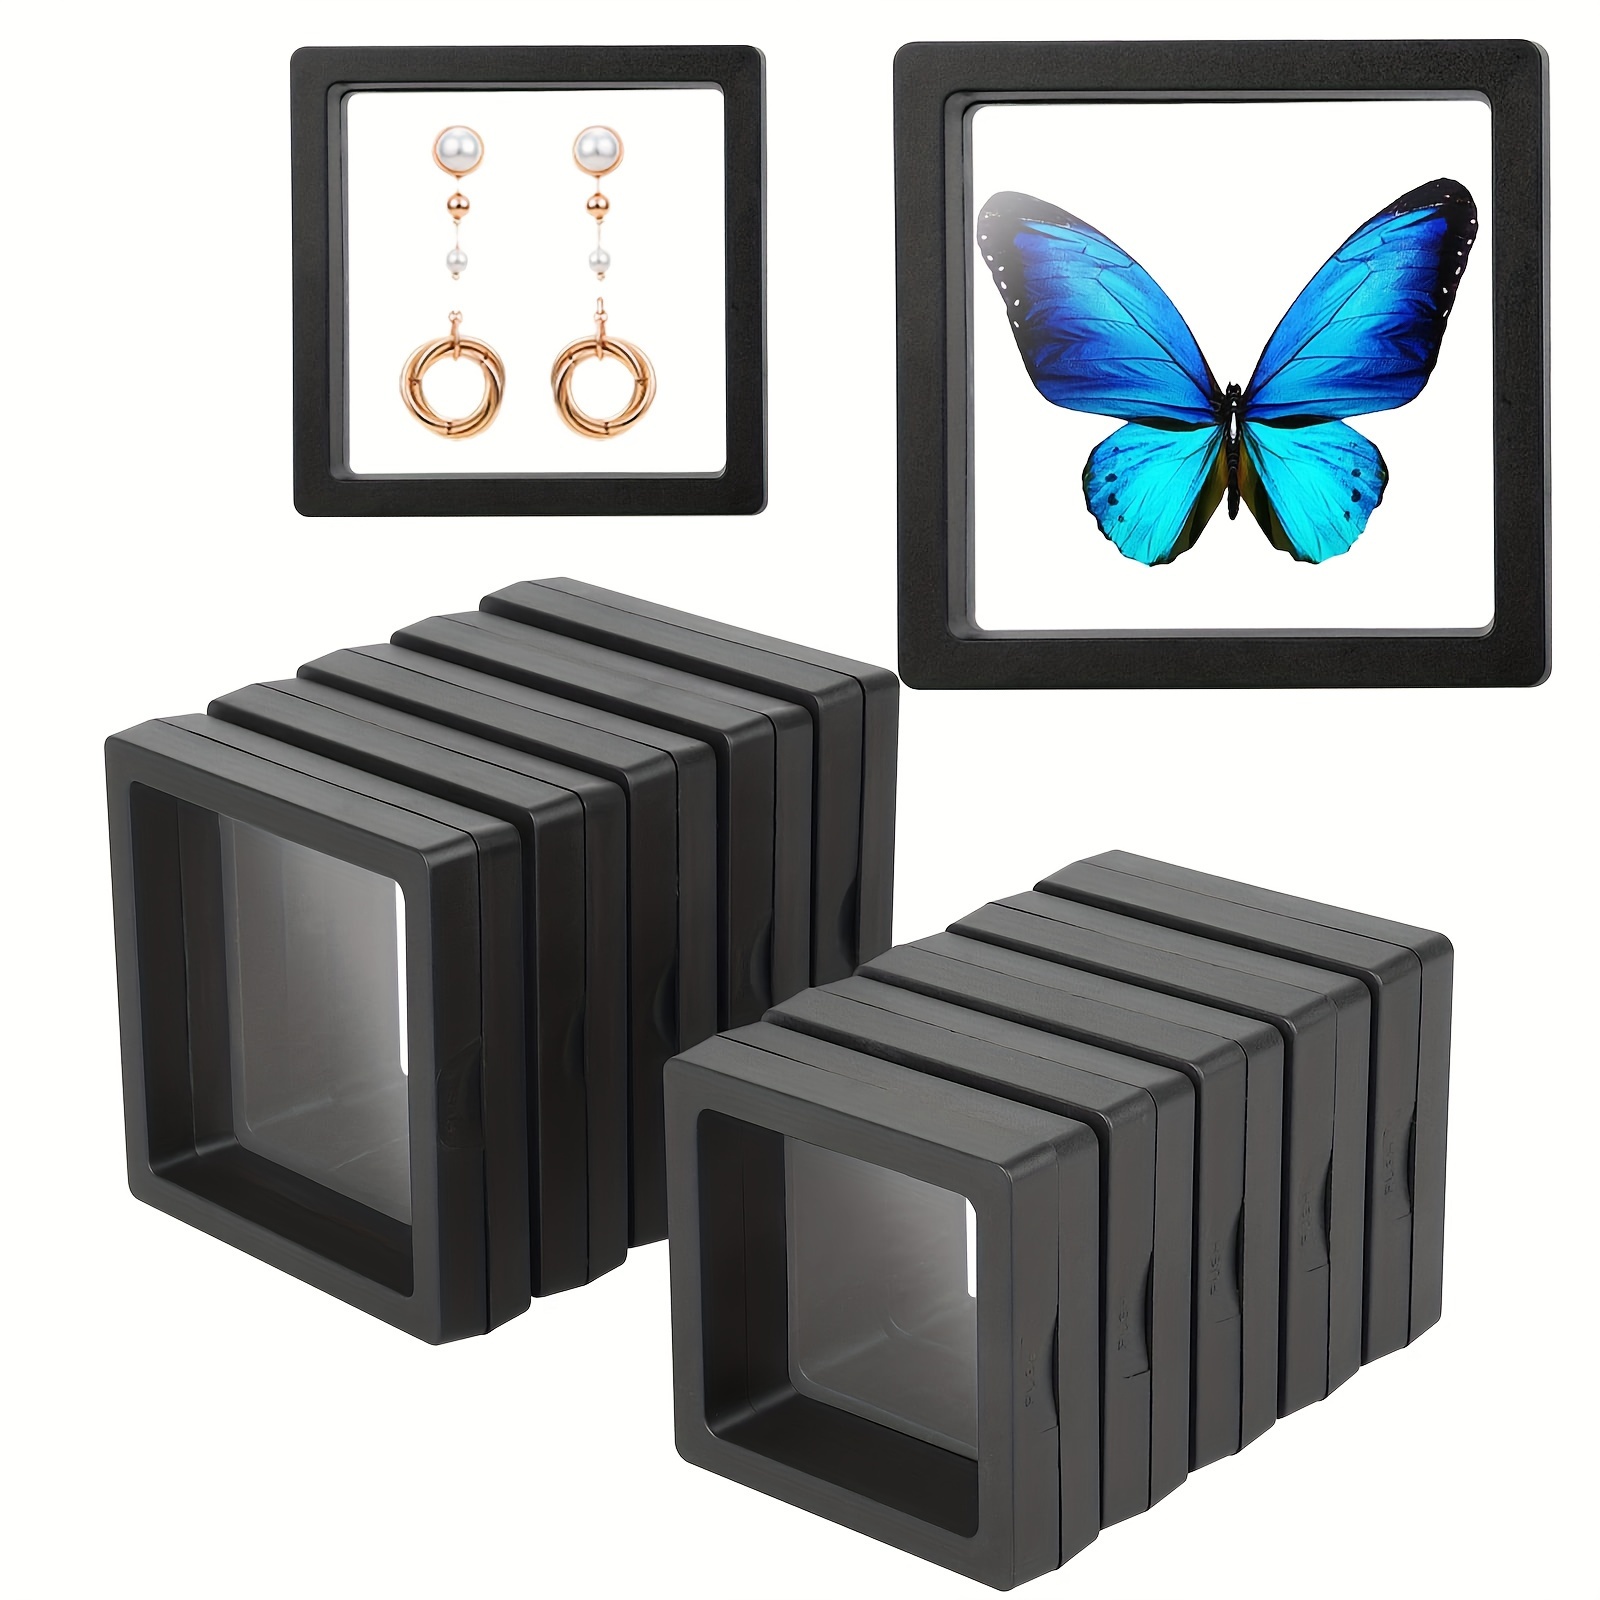 Bobasndm Picture Holder Eye-catching Square Anti-deform Picture